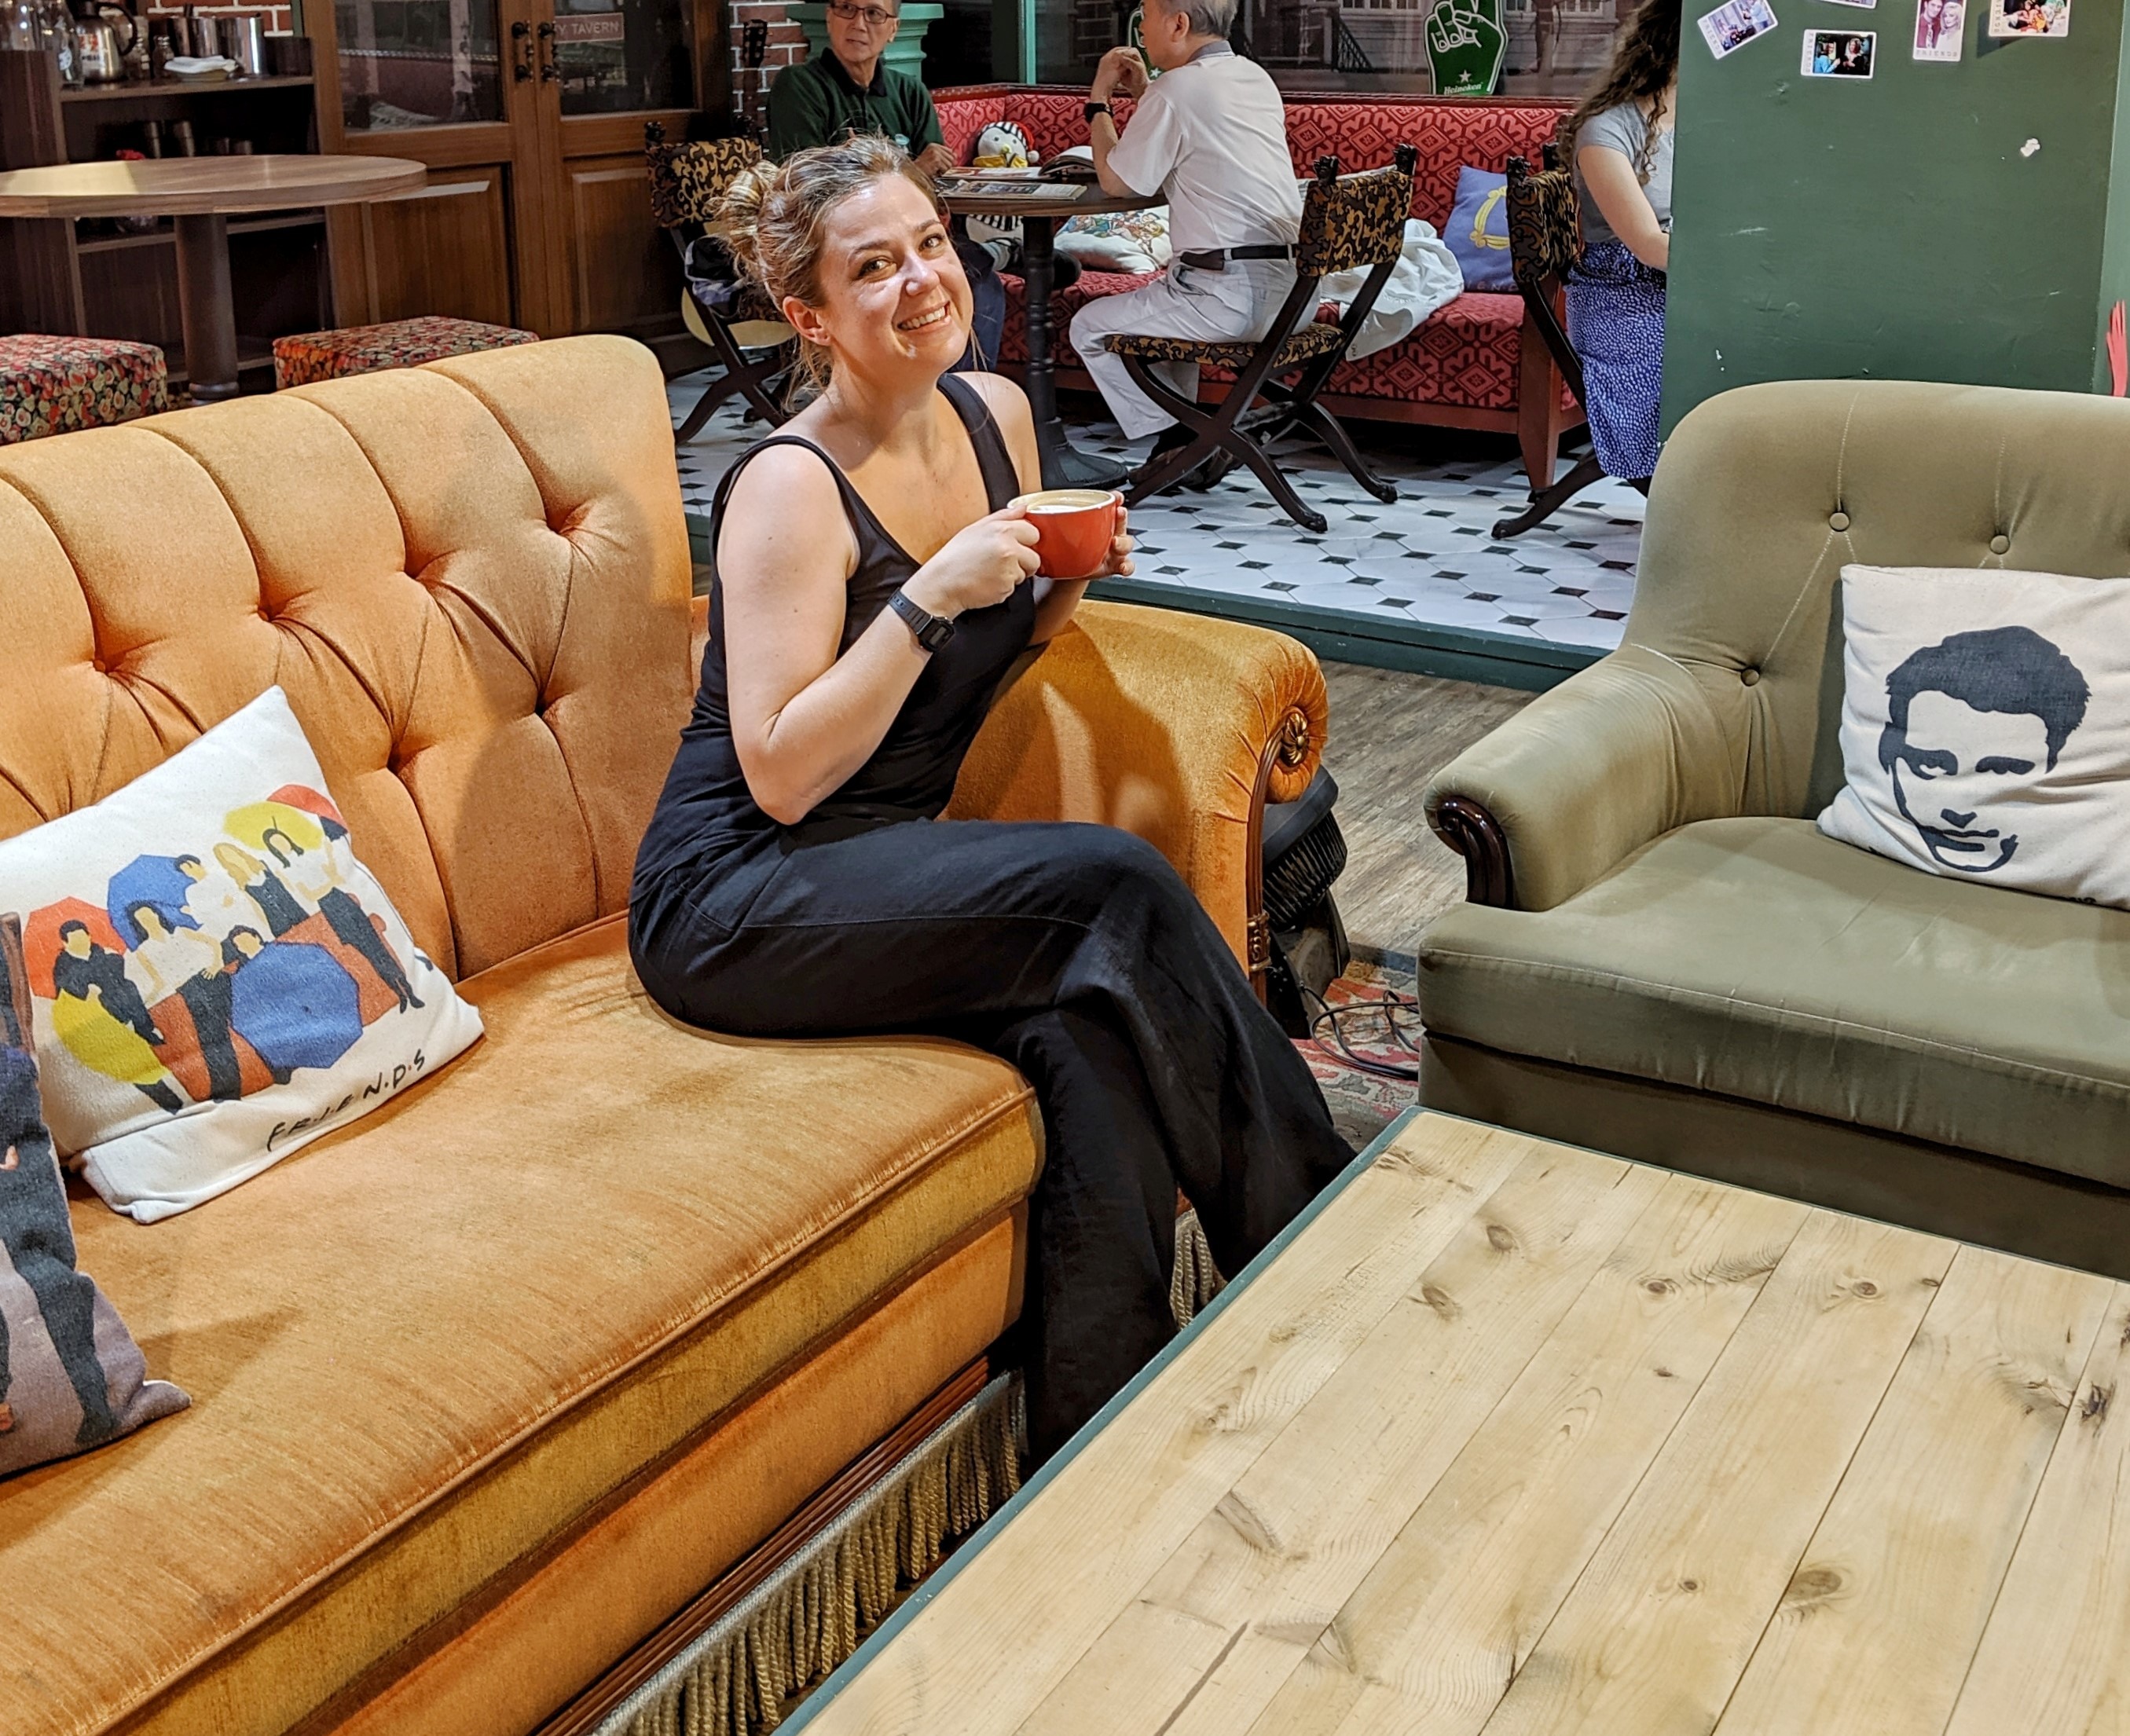 Aly Ford is sitting on an orange sofa in a coffee shop enjoying a cup of coffee. Behind her two people are talking.